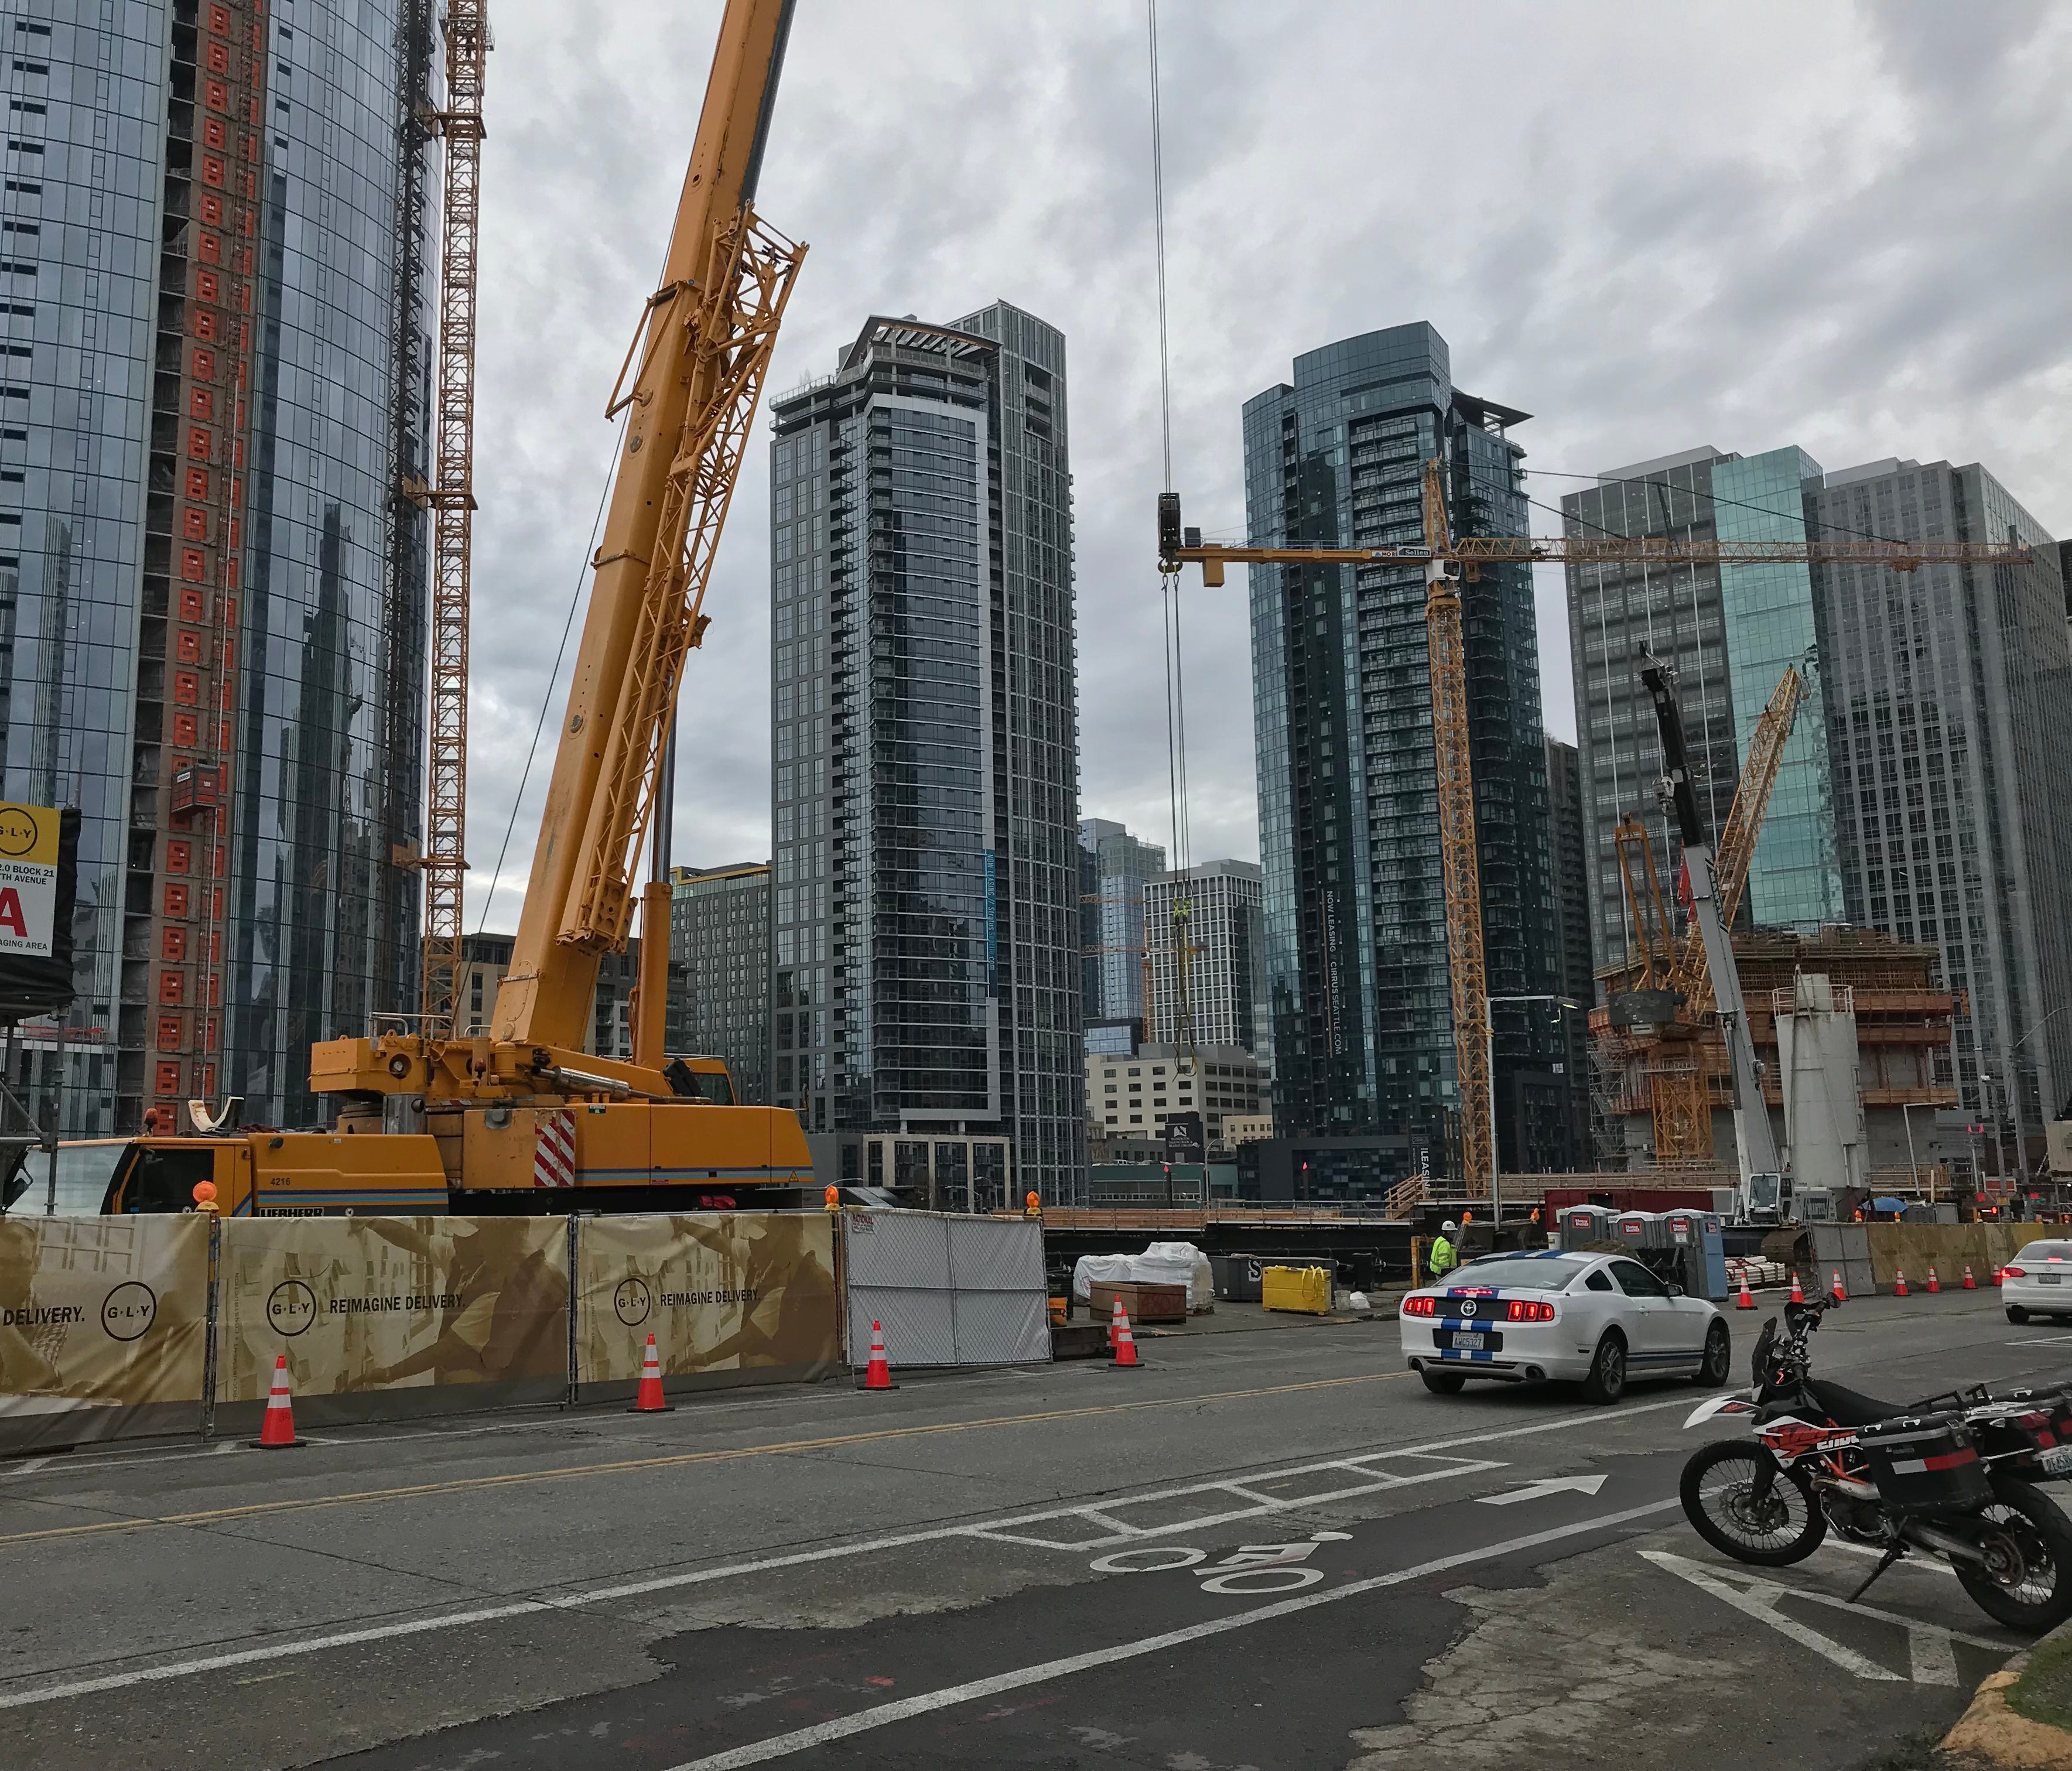 A street near Amazon headquarters in downtown Seattle, where cranes dot the sky as new office buildings, condos and apartments are built.